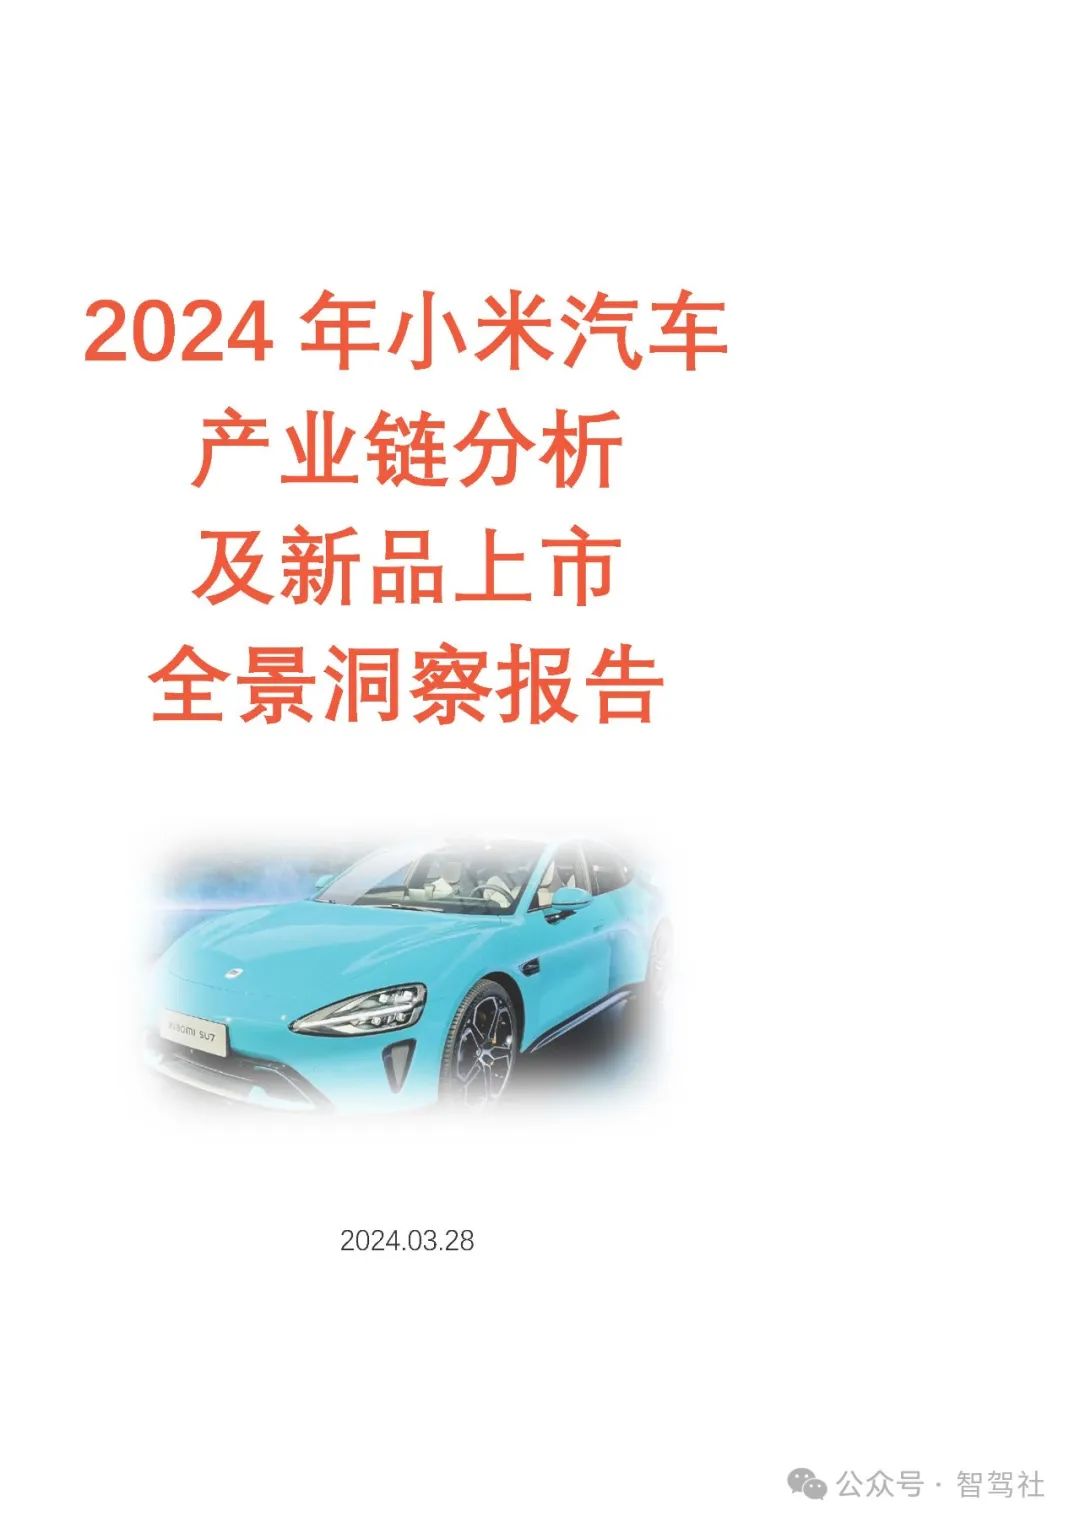 <span style='color:red;'>报告</span><span style='color:red;'>分享</span>：<span style='color:red;'>2024</span> 年小米汽车产业链<span style='color:red;'>分析</span>及新品上市<span style='color:red;'>全景</span>洞察<span style='color:red;'>报告</span>